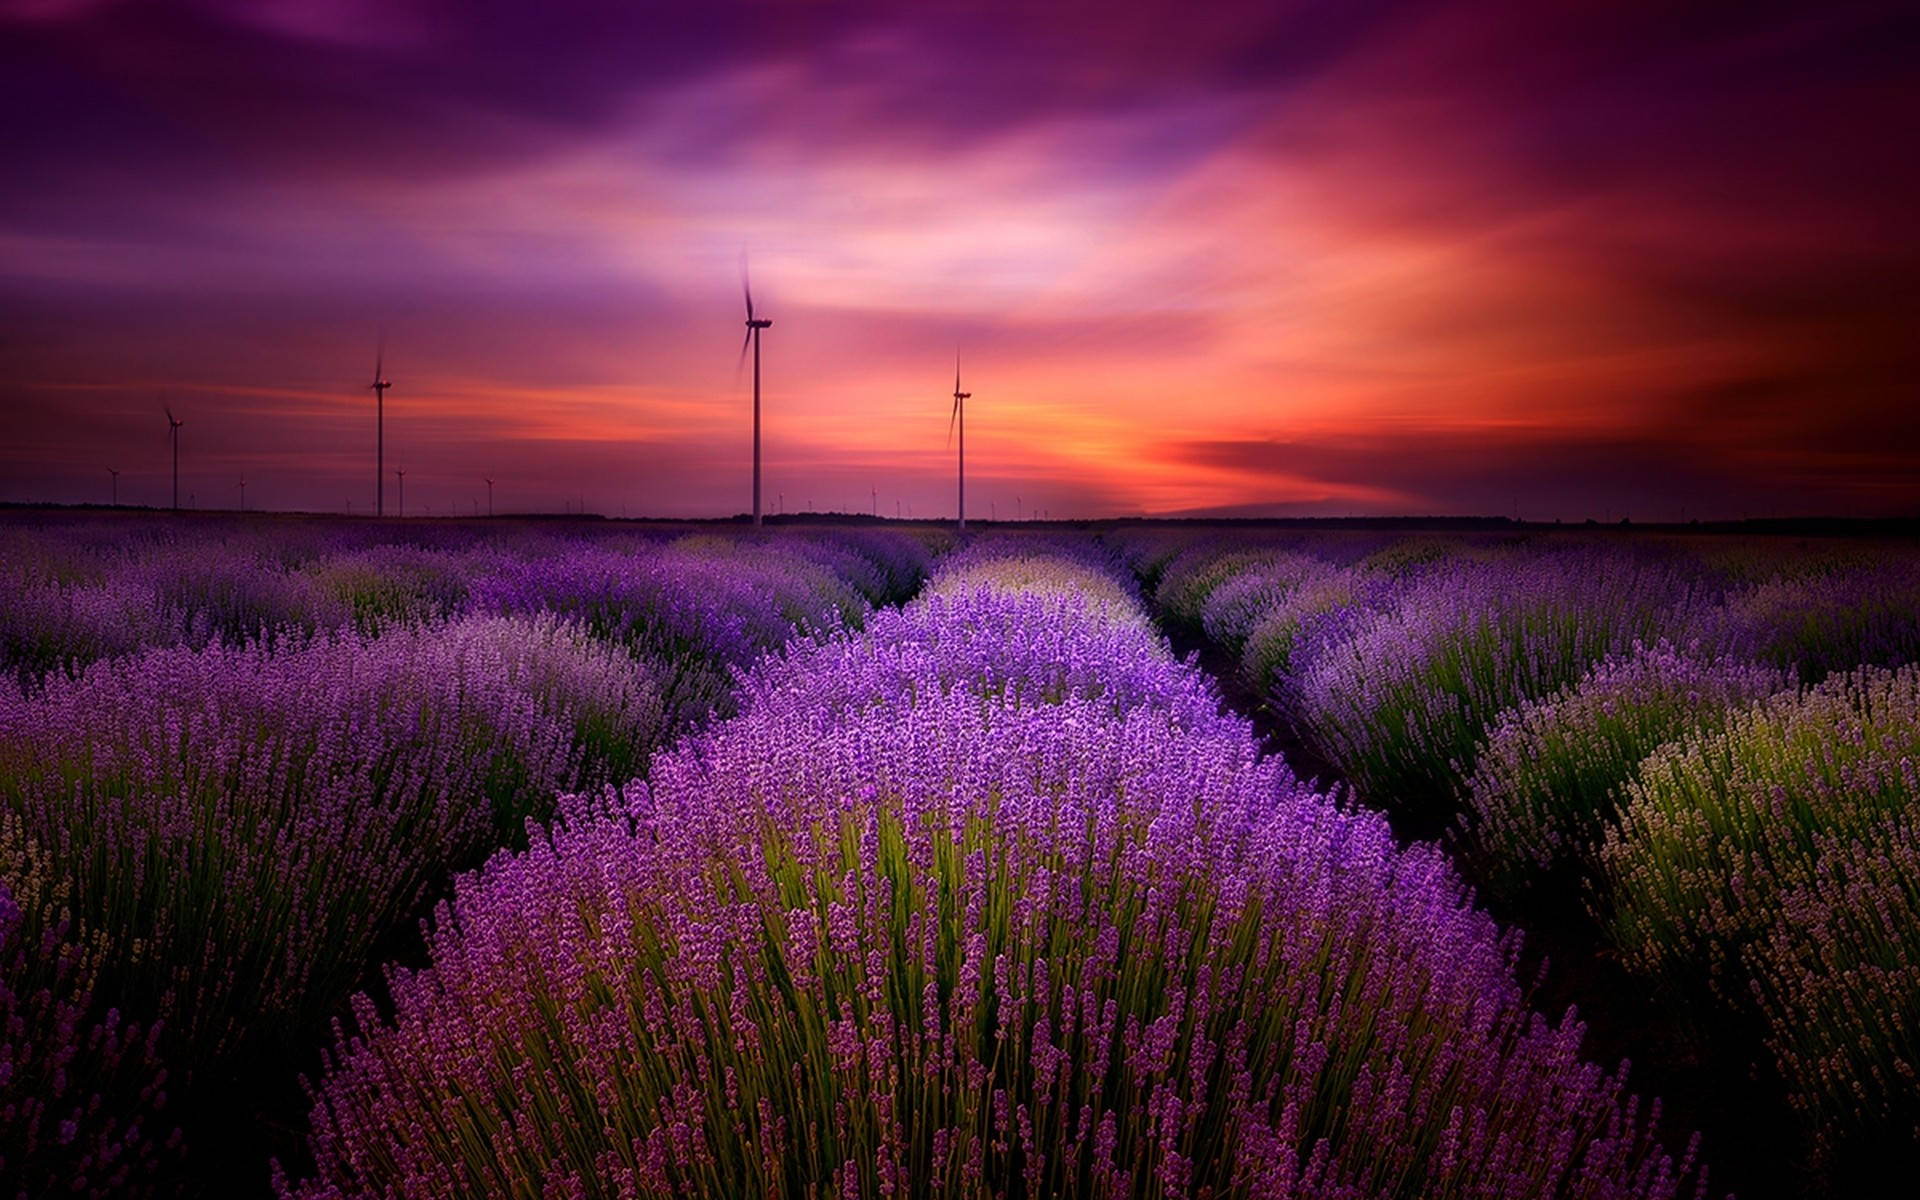 Lavender Aesthetic Field And Windmills Wallpaper